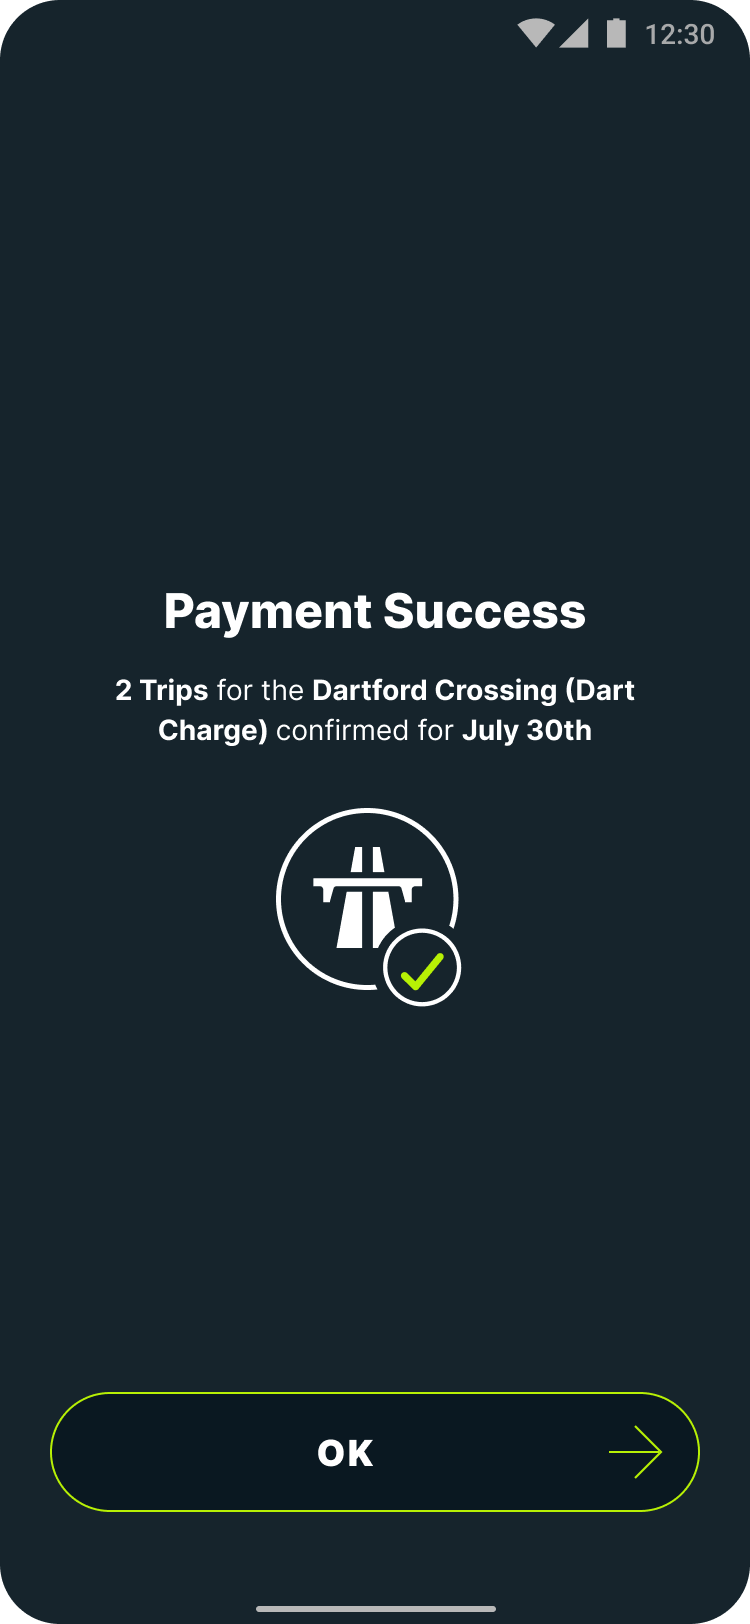 Payment confirmation screen for the Dartford Crossing on Caura